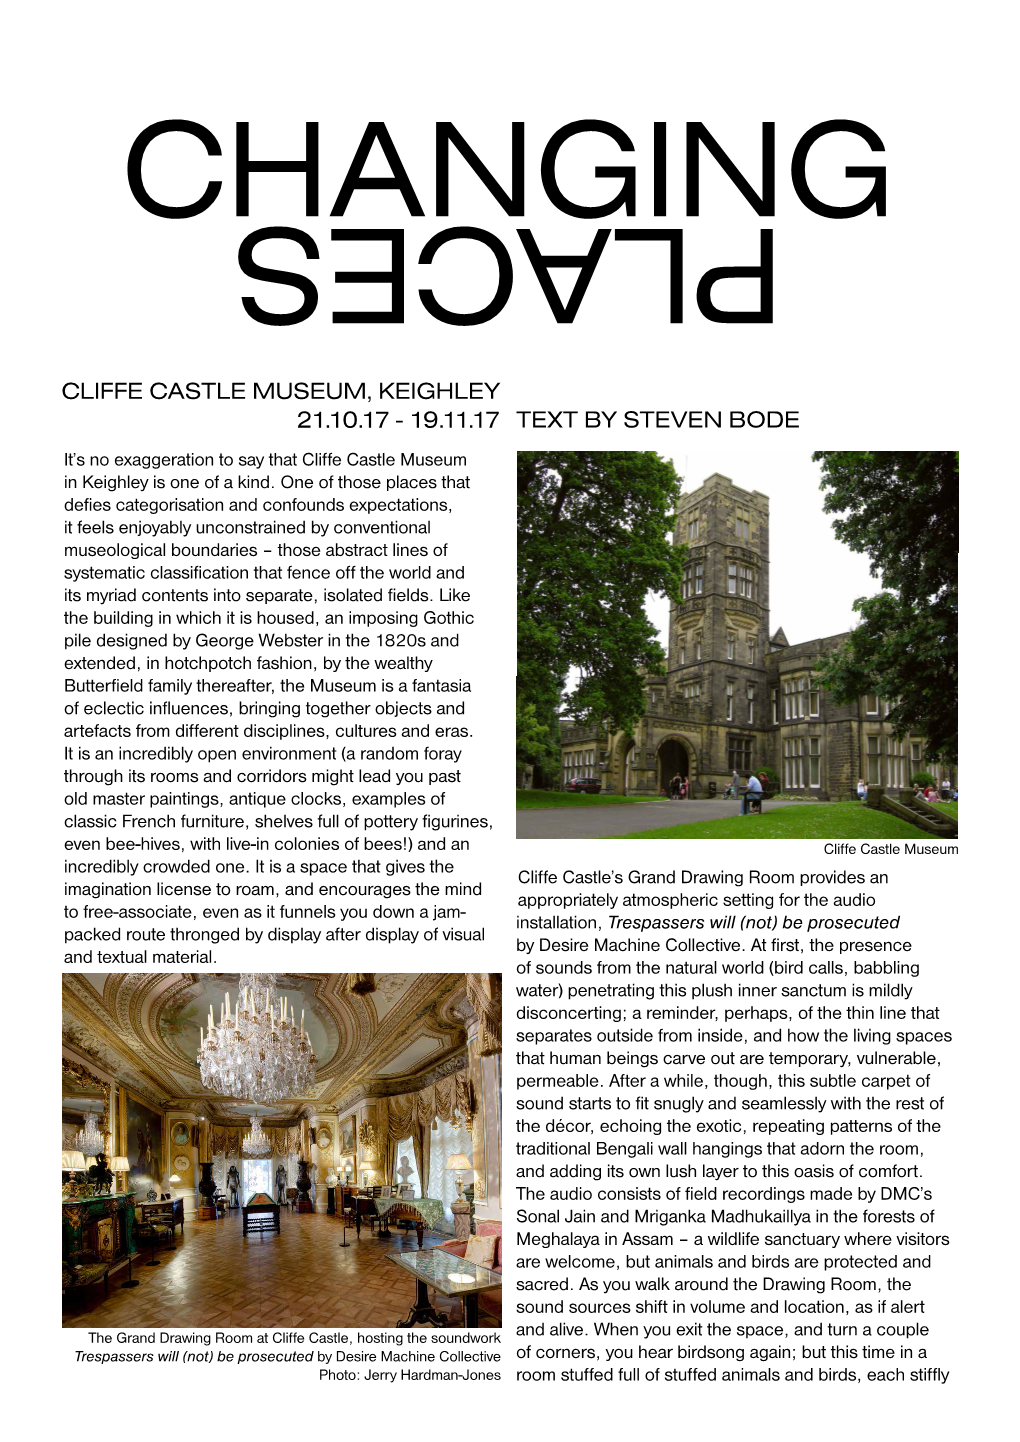 CLIFFE CASTLE MUSEUM, KEIGHLEY 21.10.17 - 19.11.17 TEXT by STEVEN BODE It’S No Exaggeration to Say That Cliffe Castle Museum in Keighley Is One of a Kind